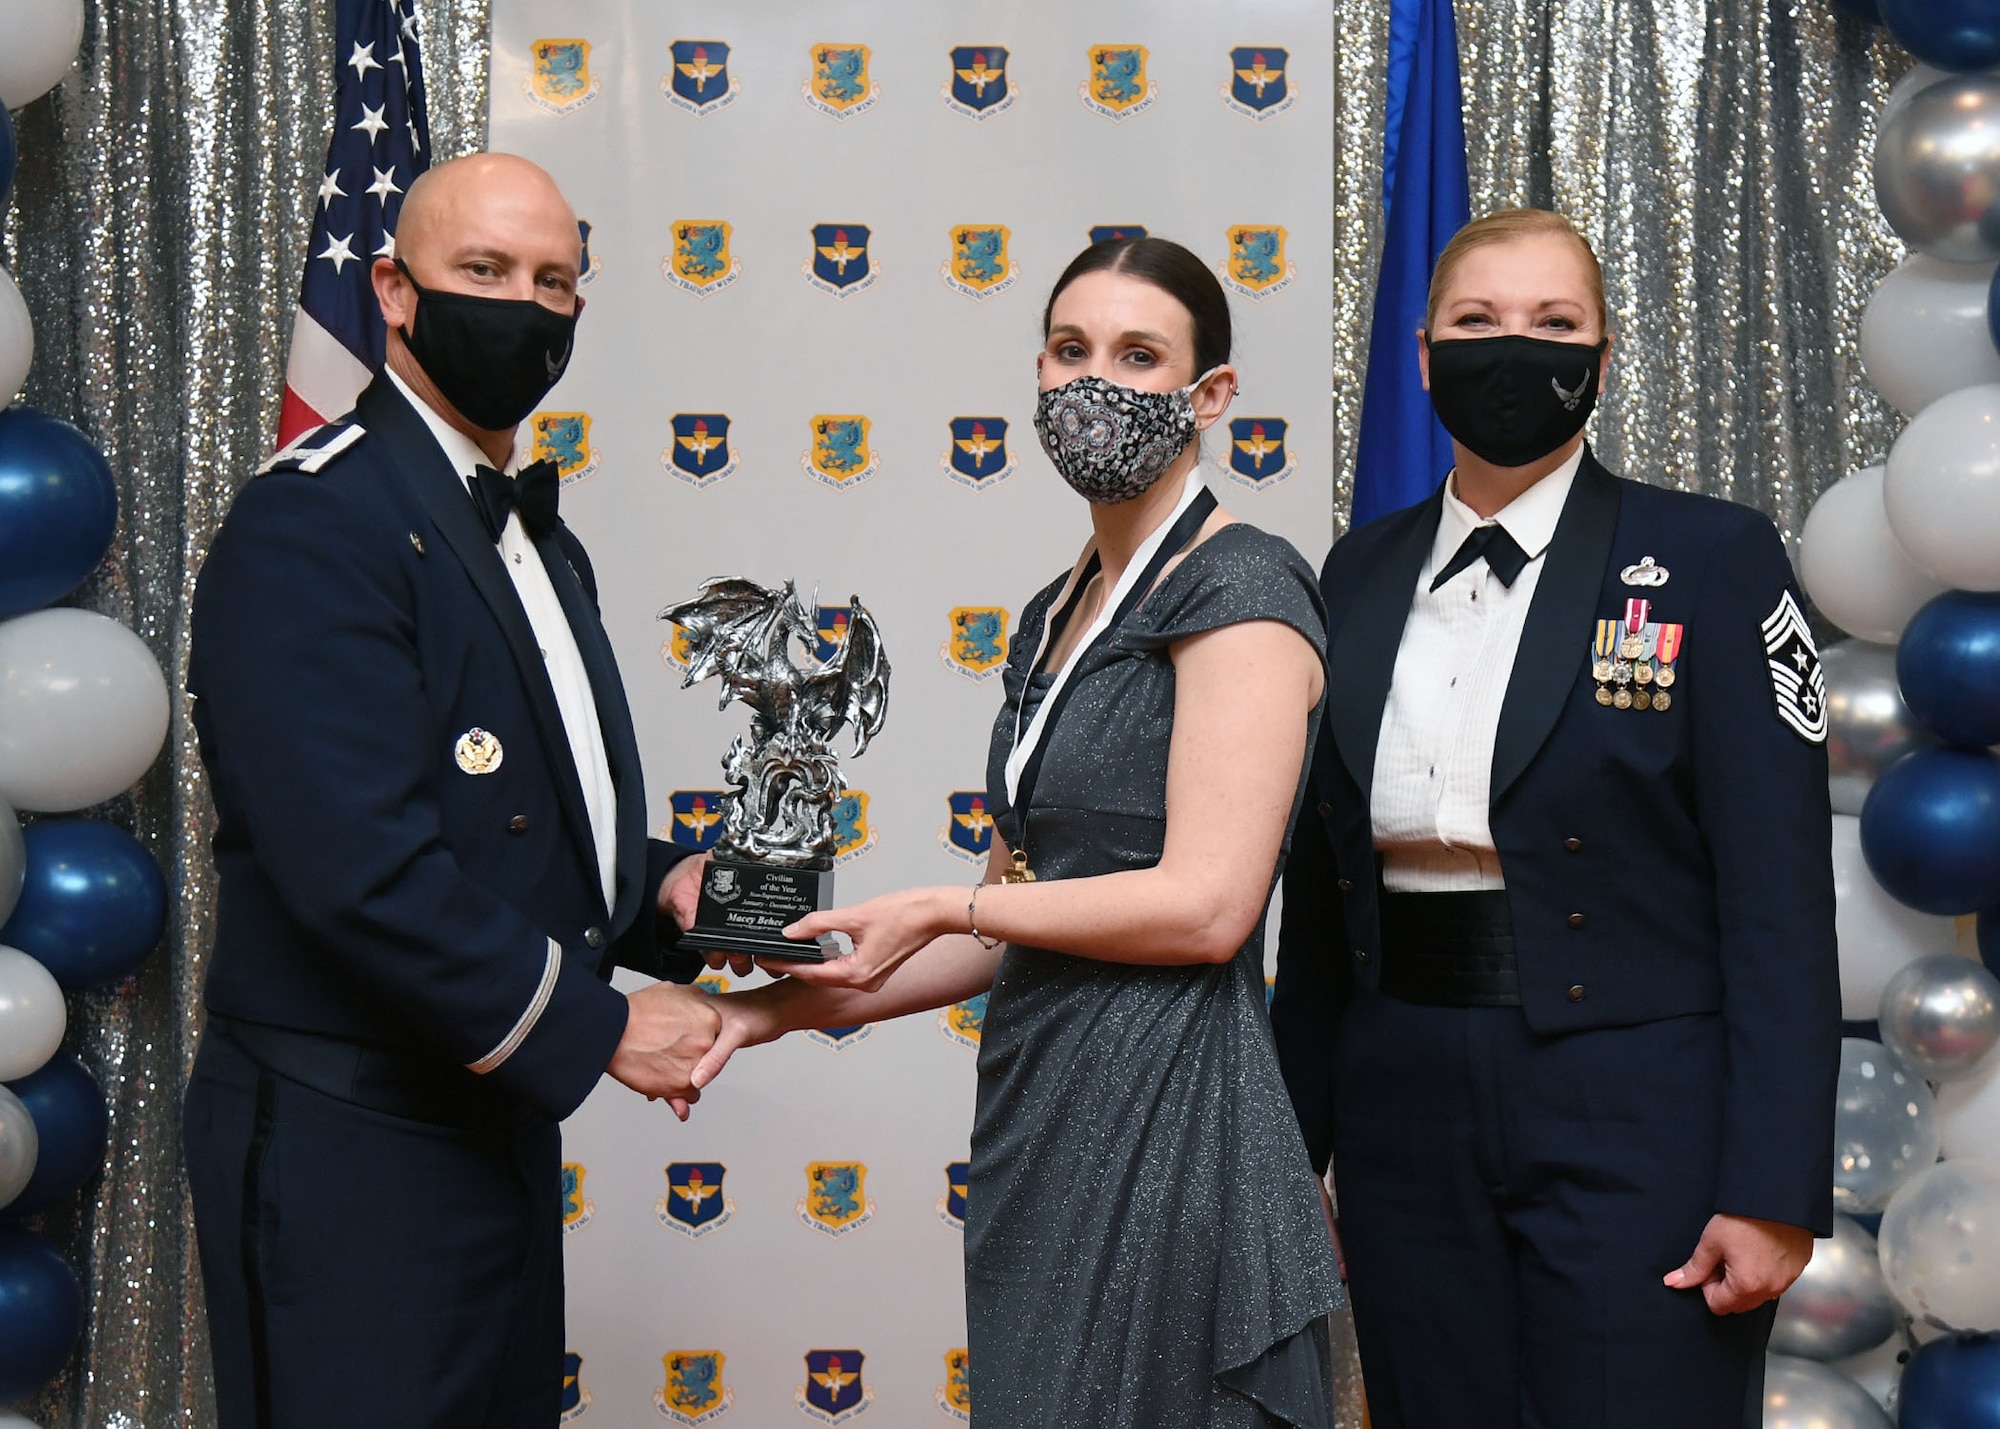 U.S. Air Force Col. William Hunter, 81st Training Wing commander, and Chief Master Sgt. Sarah Esparza, 81st TRW command chief, present Macey Behee, 81st Contracting Squadron purchasing agent, with the Civilian of the Year award, Non-Supervisor Category I , during the 81st Training Wing's 2021 Annual Awards Ceremony inside the Bay Breeze Event Center at Keesler Air Force Base, Mississippi, Feb. 17, 2022. During the ceremony, base leadership recognized outstanding Airmen and civilians from across the installation for their accomplishments throughout 2021. (U.S. Air Force photo by Kemberly Groue)